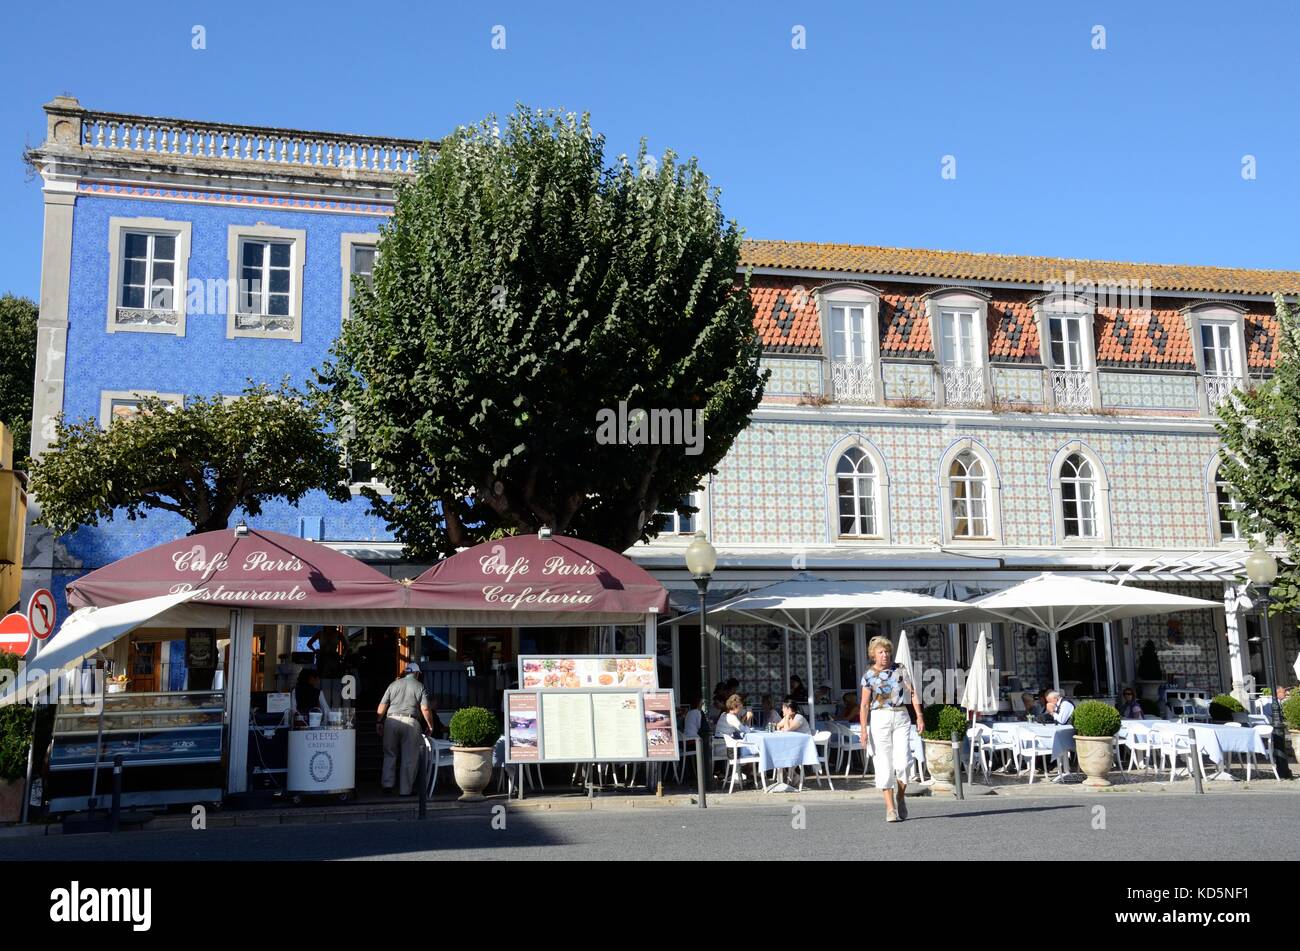 Street cafe restaurant with mosaic tile facade Sintra Portugal Stock Photo